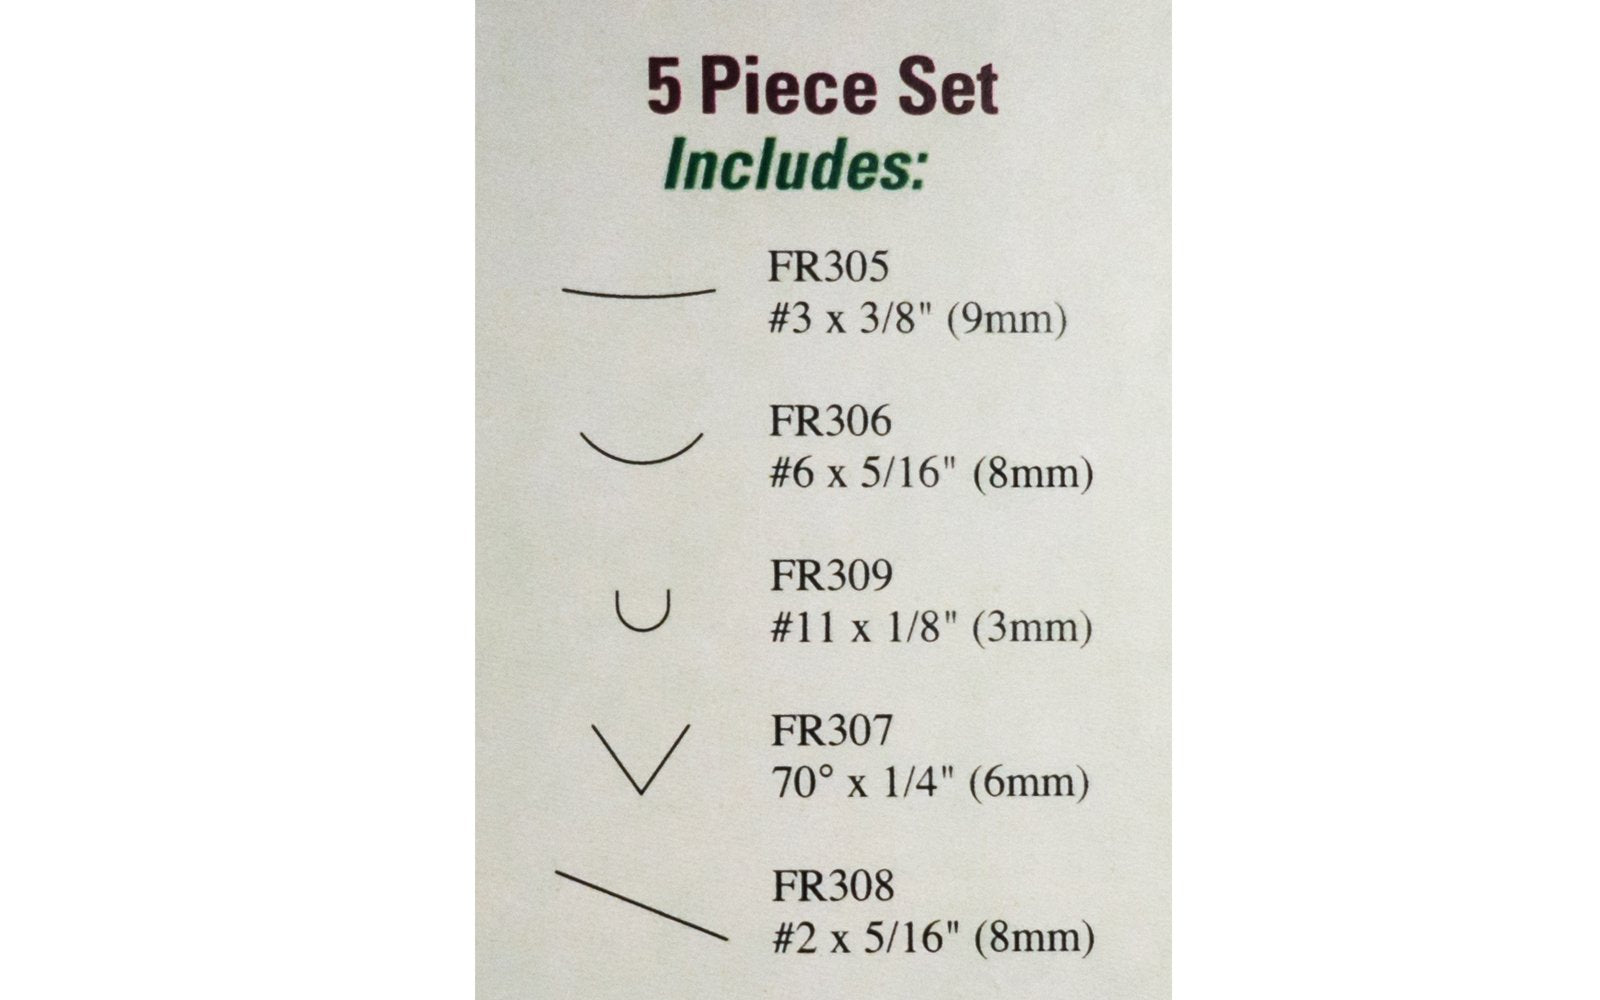 Flexcut Beginners Palm Carving Set ~ FR310 - 5-piece set - Includes Sweep #3 x 3/8" (9 mm), Sweep #6 x 5/16" (8 mm), Gouge #11 x 1/8" (3 mm), Parting V-Tool 70° x 1/4" (6mm), Skew #2 x 5/16" (8mm) - High Carbon Steel blades - Ash wood handles - Palm Carving Tool Set - Made in USA